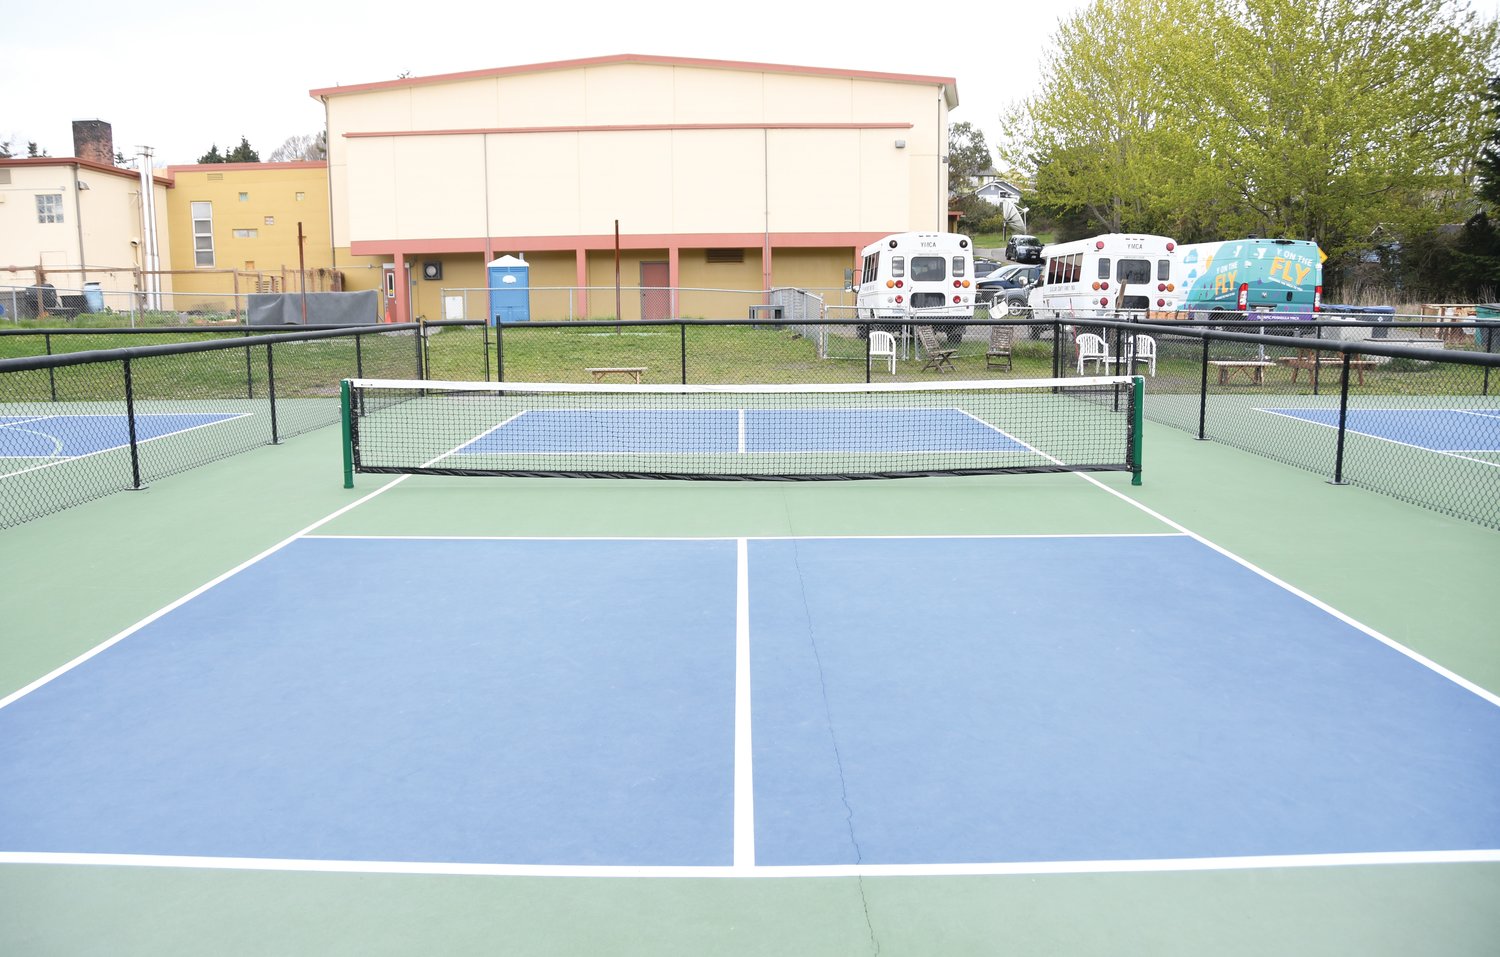 The new pickleball courts at Mountain View Commons.